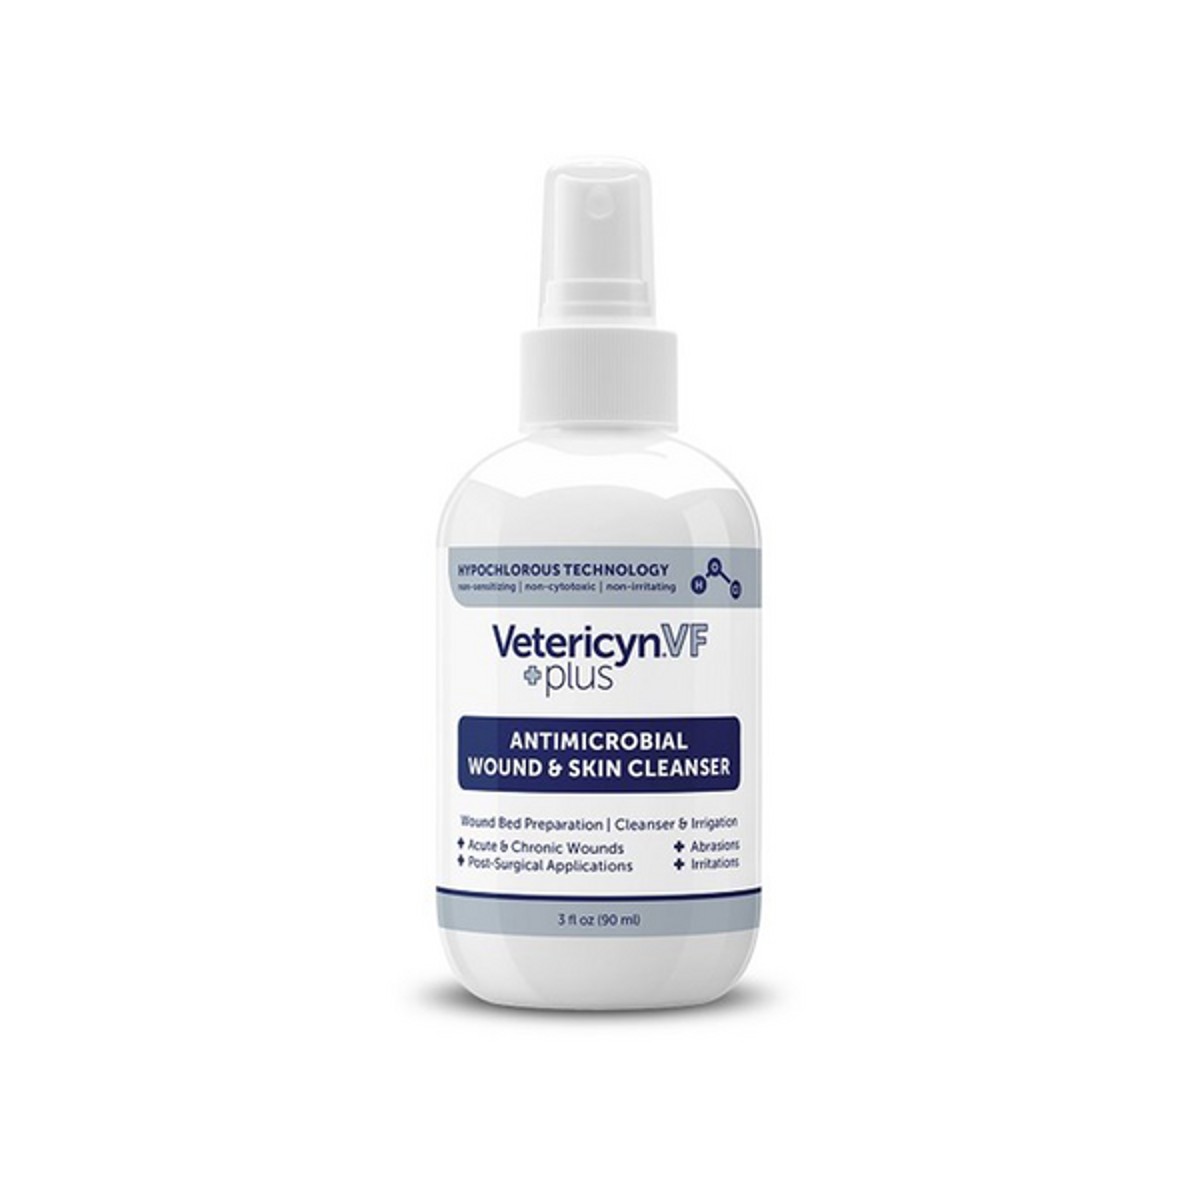 Vetericyn VF Plus Antimicrobial Wound & Skin Cleanser for Pets